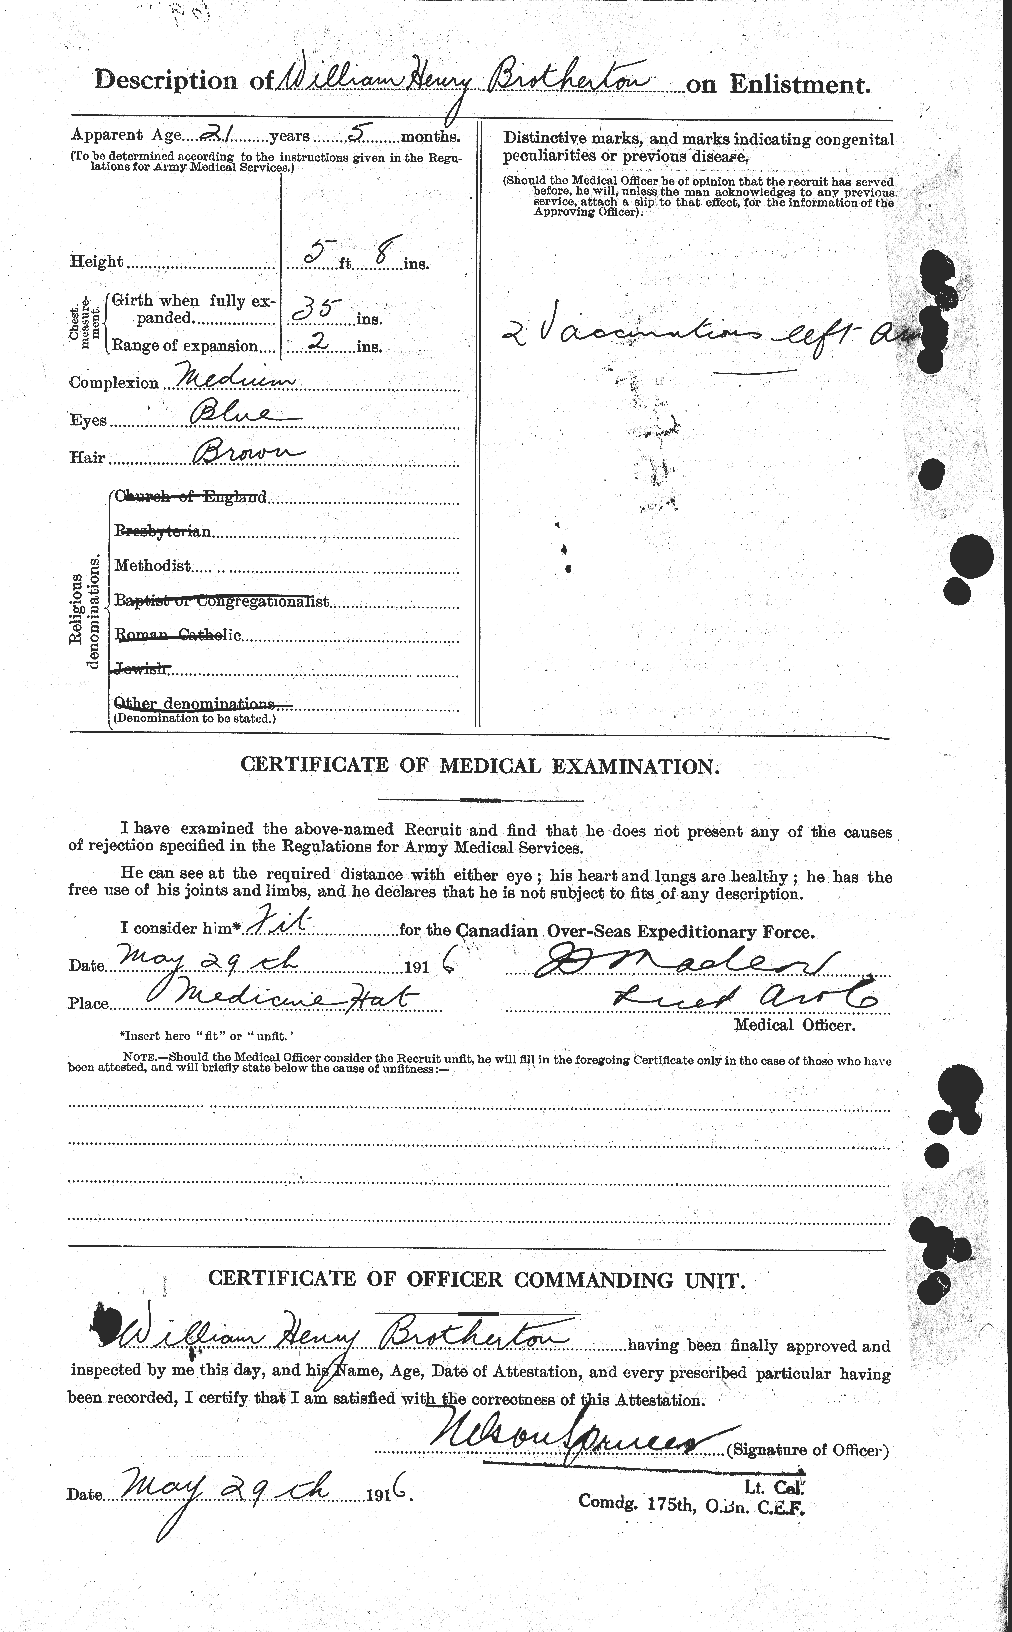 Personnel Records of the First World War - CEF 264995b